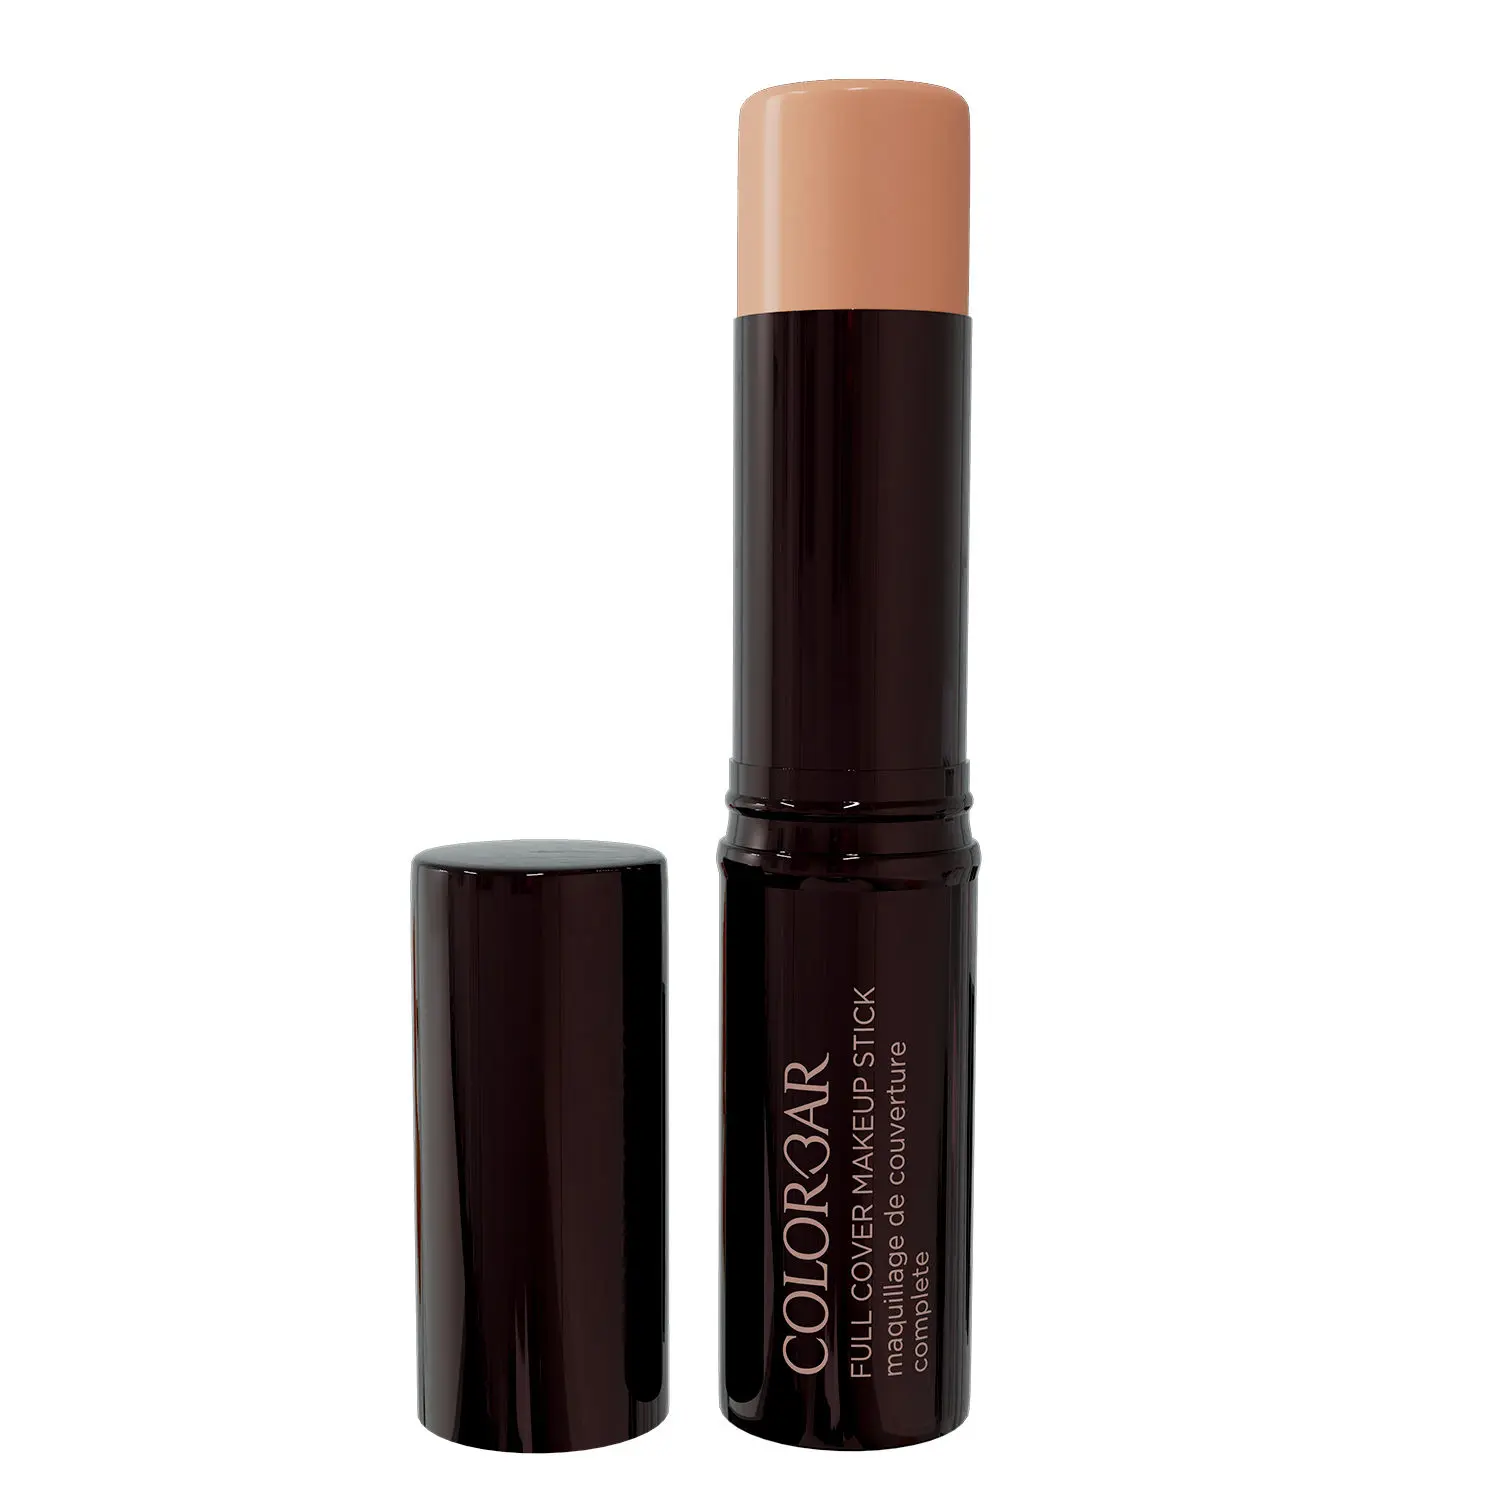 Colorbar Full Cover Makeup Stick With SPF 30 Au Natural 002 (9 g)